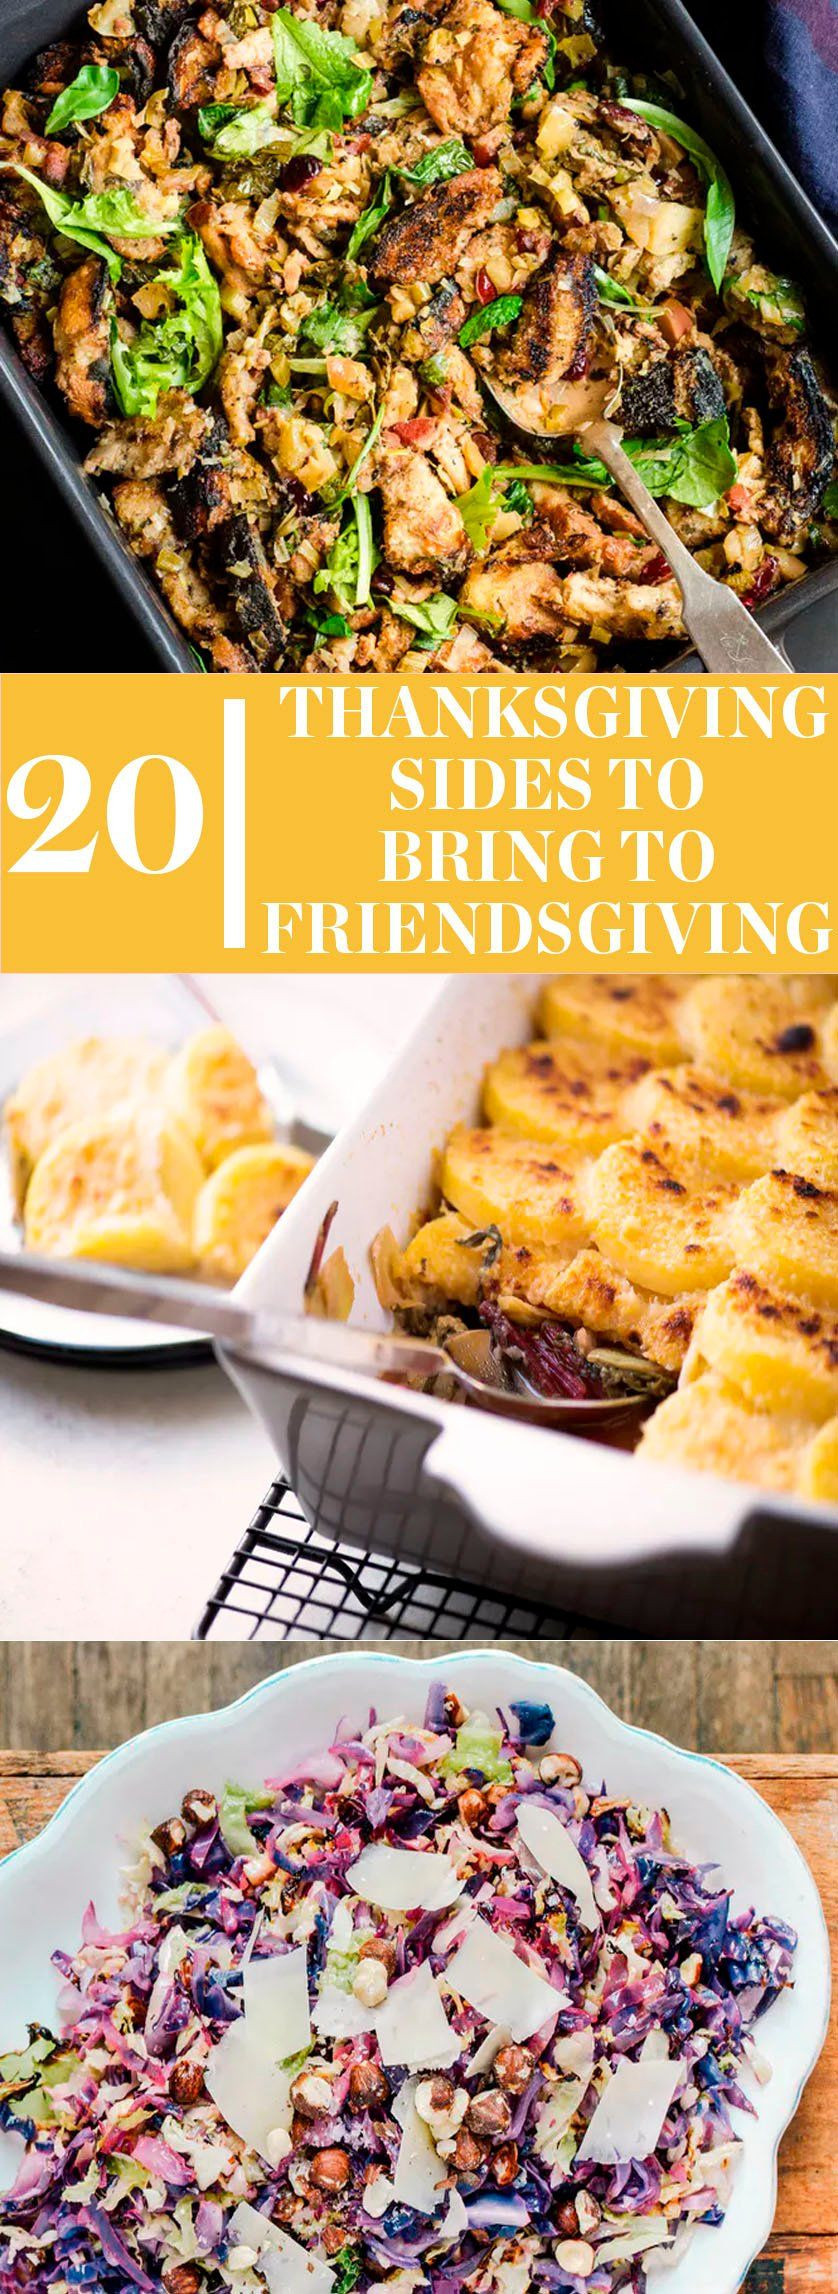 Side Dishes To Bring To A Party
 20 Thanksgiving Sides You Can Bring to Friendsgiving